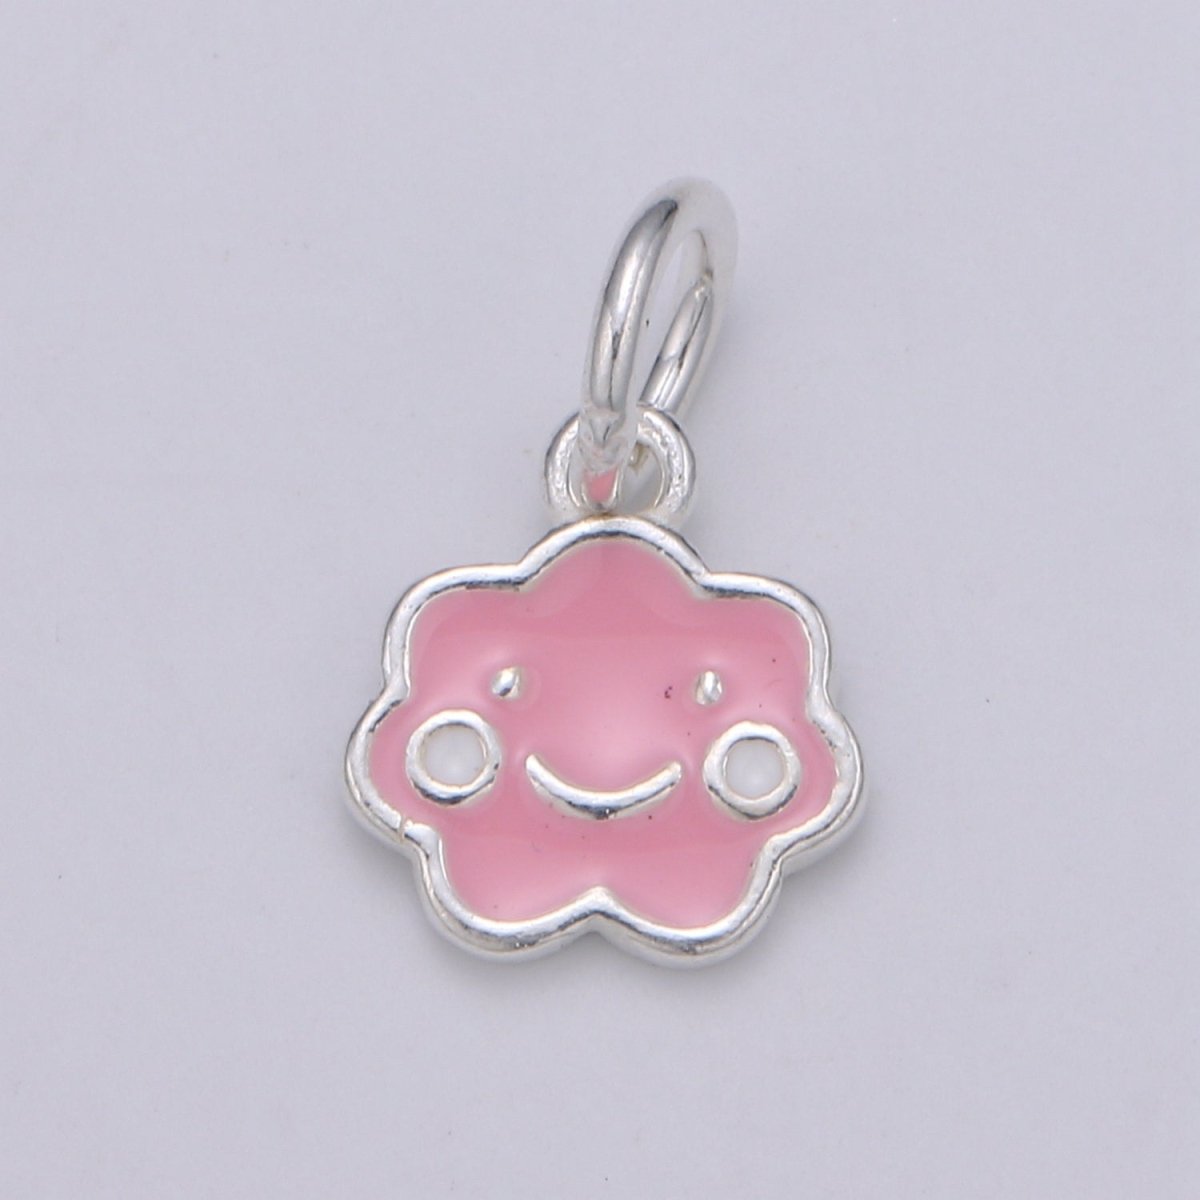 Sterling Silver Cloud Charm, 925 Sterling Silver Kawaii Charms, 14.5x9mm Cute CLOUD charm for Bracelet Necklace Earring, SL-033 SL-034 - DLUXCA